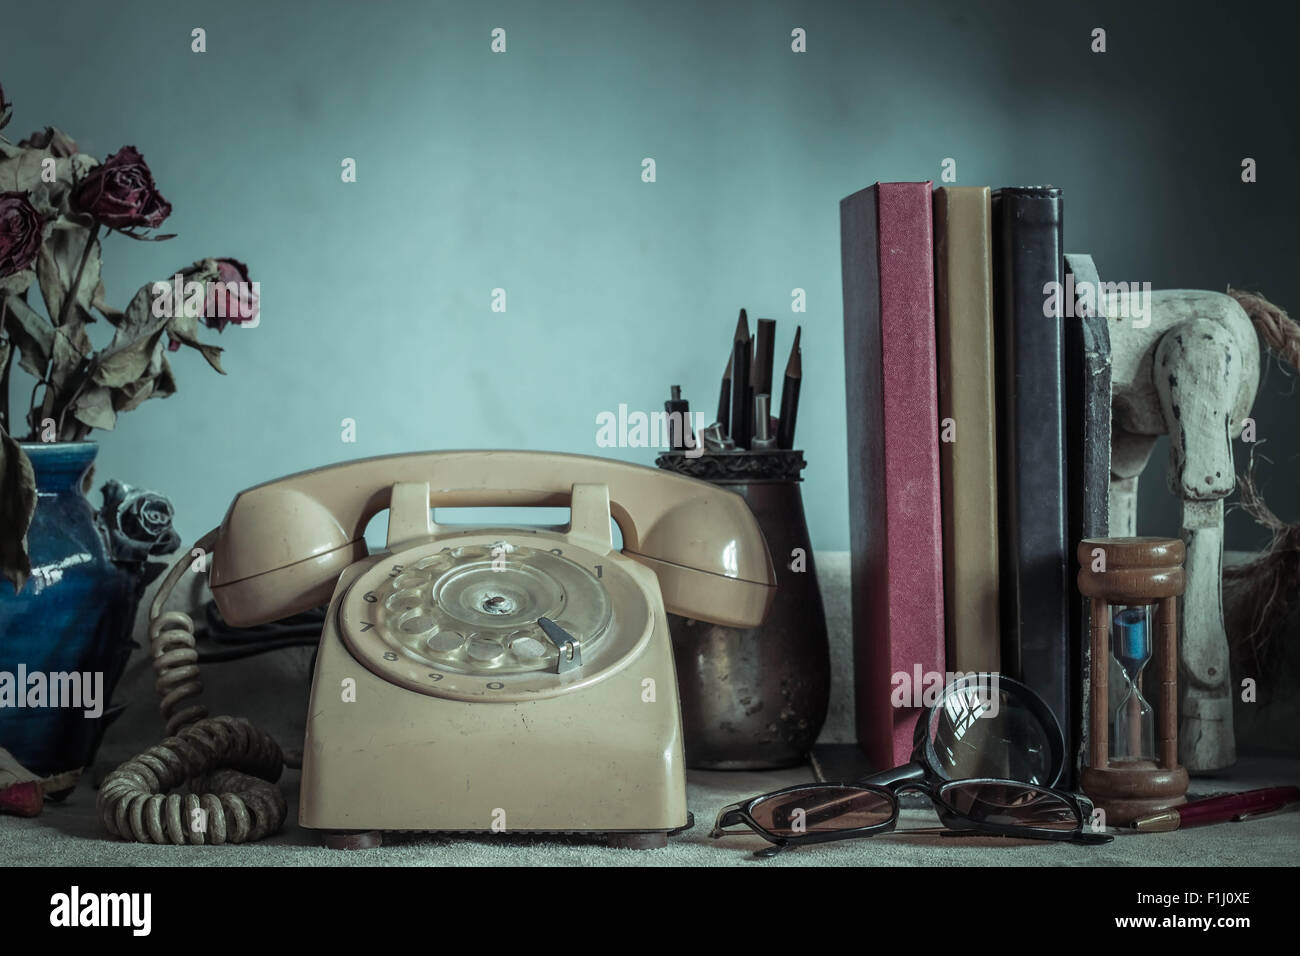 Old phone on the table and working with vintage images. Stock Photo